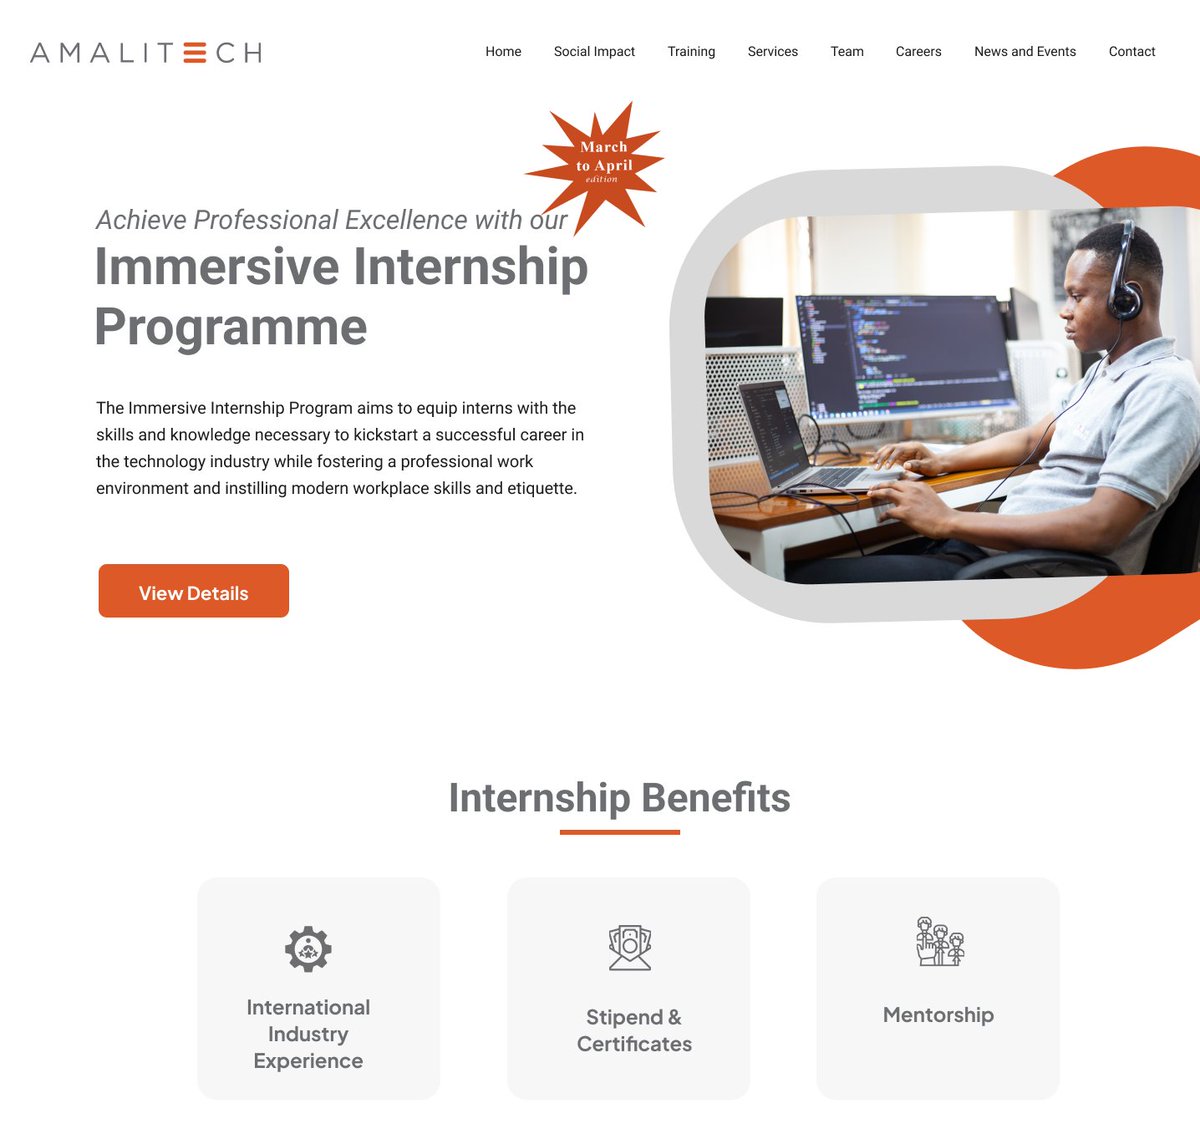 Applications for our March-April #Internships  are OPEN! 
Join us and learn from industry pros, and gain valuable industry skills and more! 

Swipe to explore eligibility and structure. 
Visit amalitech.org/internships/ and apply by Feb 20!  

#WorkwithAmaliTech #Internships